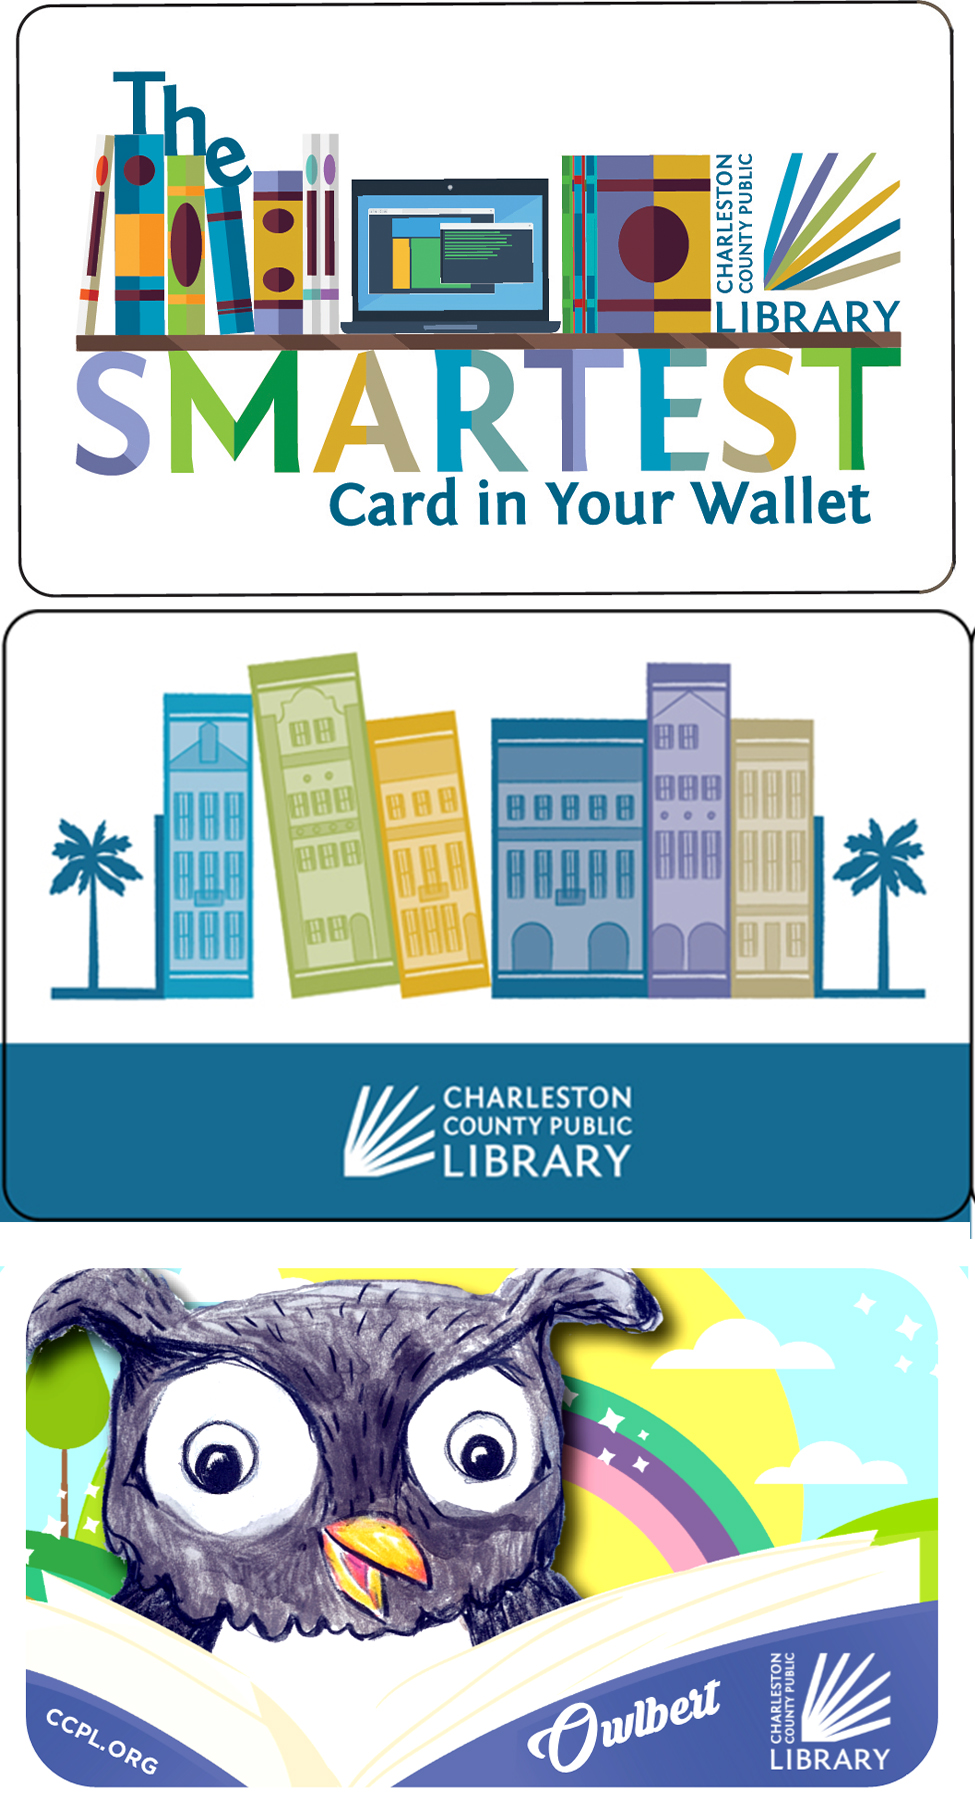 CCPL debuts new library cards, including one just for kids